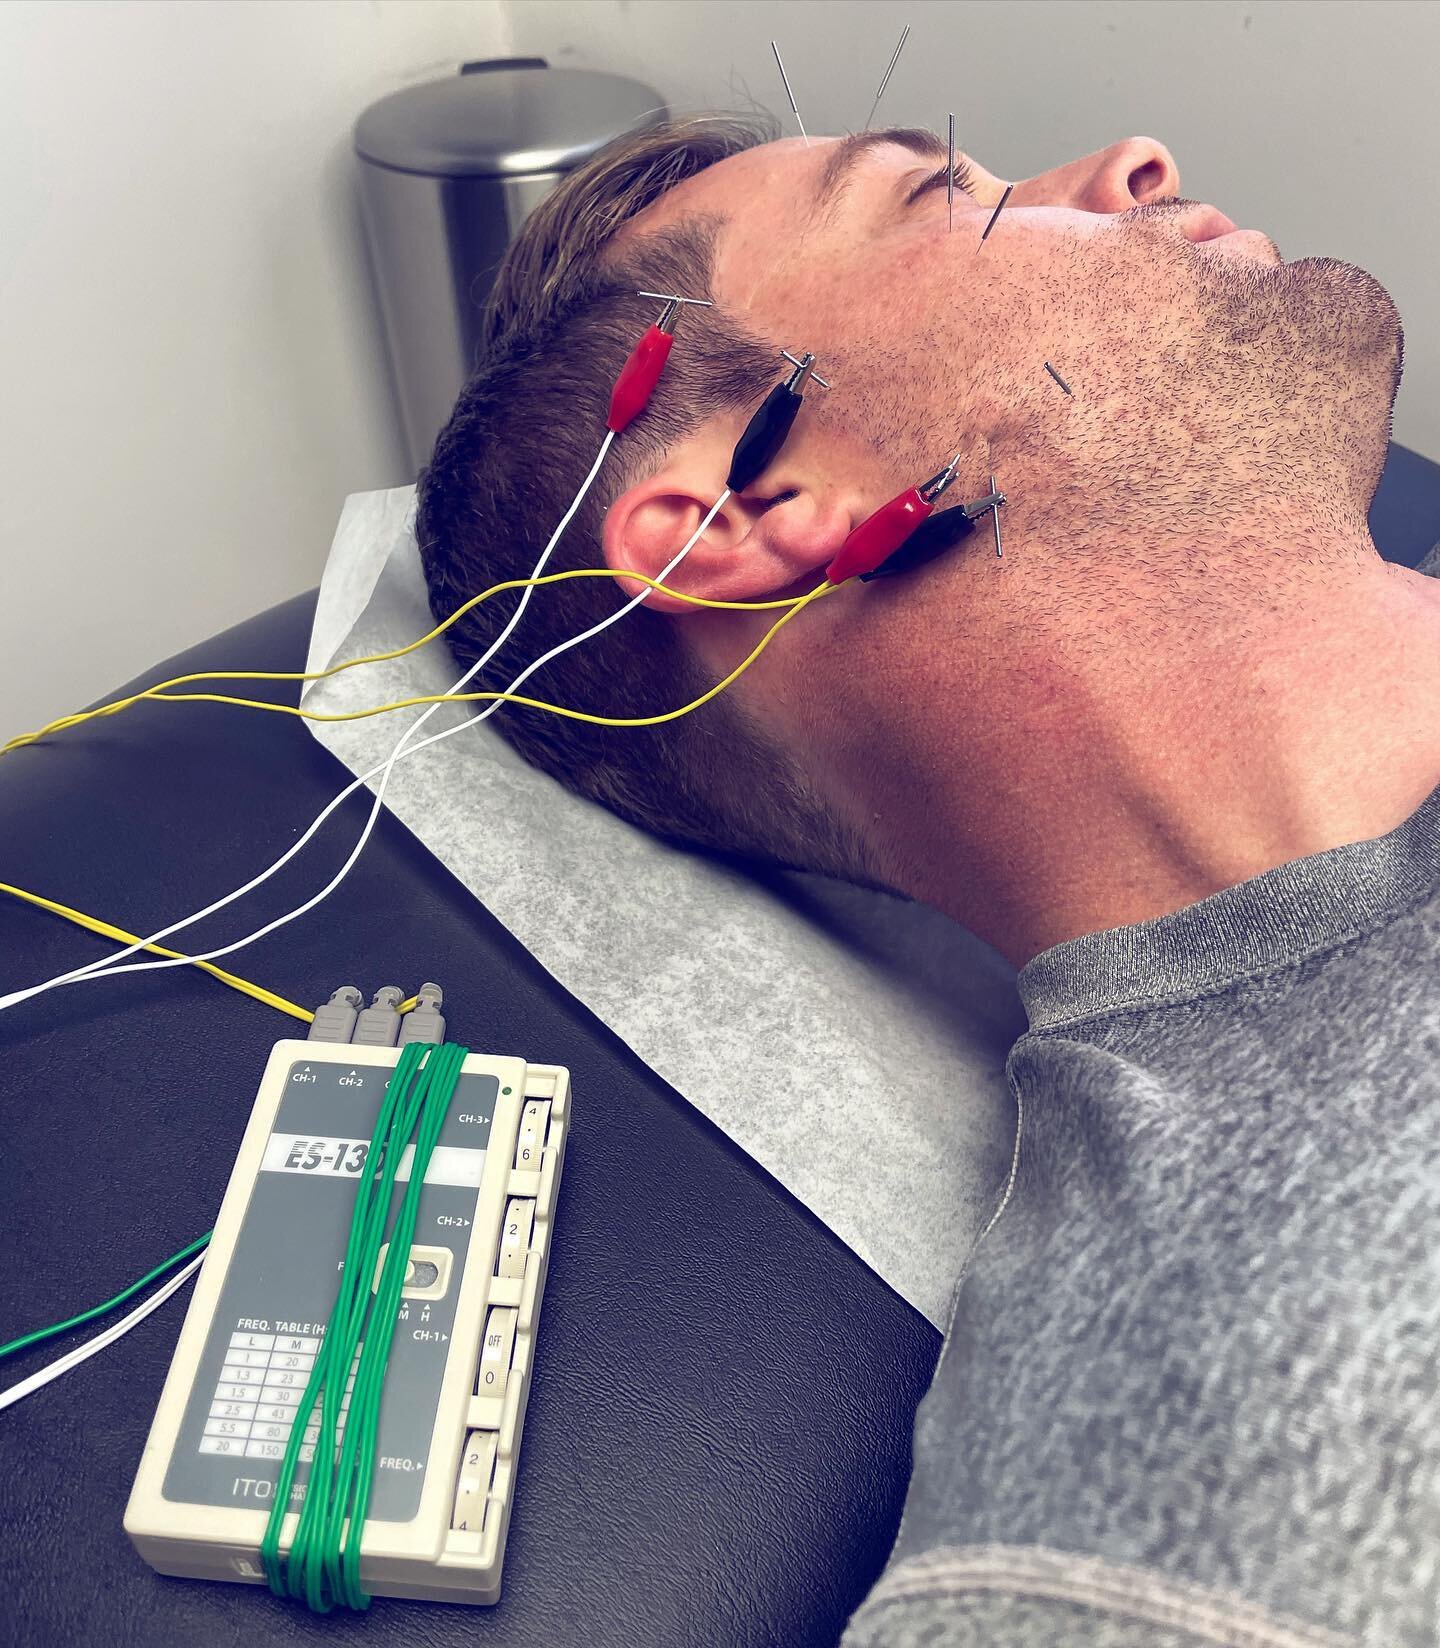 Dry Needling for later stage Bells Palsy Relief \\ 

#dryneedling #bellspalsy #face #fascialpain #inflammation #nervepain #accupuncture #sportschiro #chiropractor #sportsmed #edwardsville #stlouis #stlfitness #physio #physicaltherapy #movement #fitne